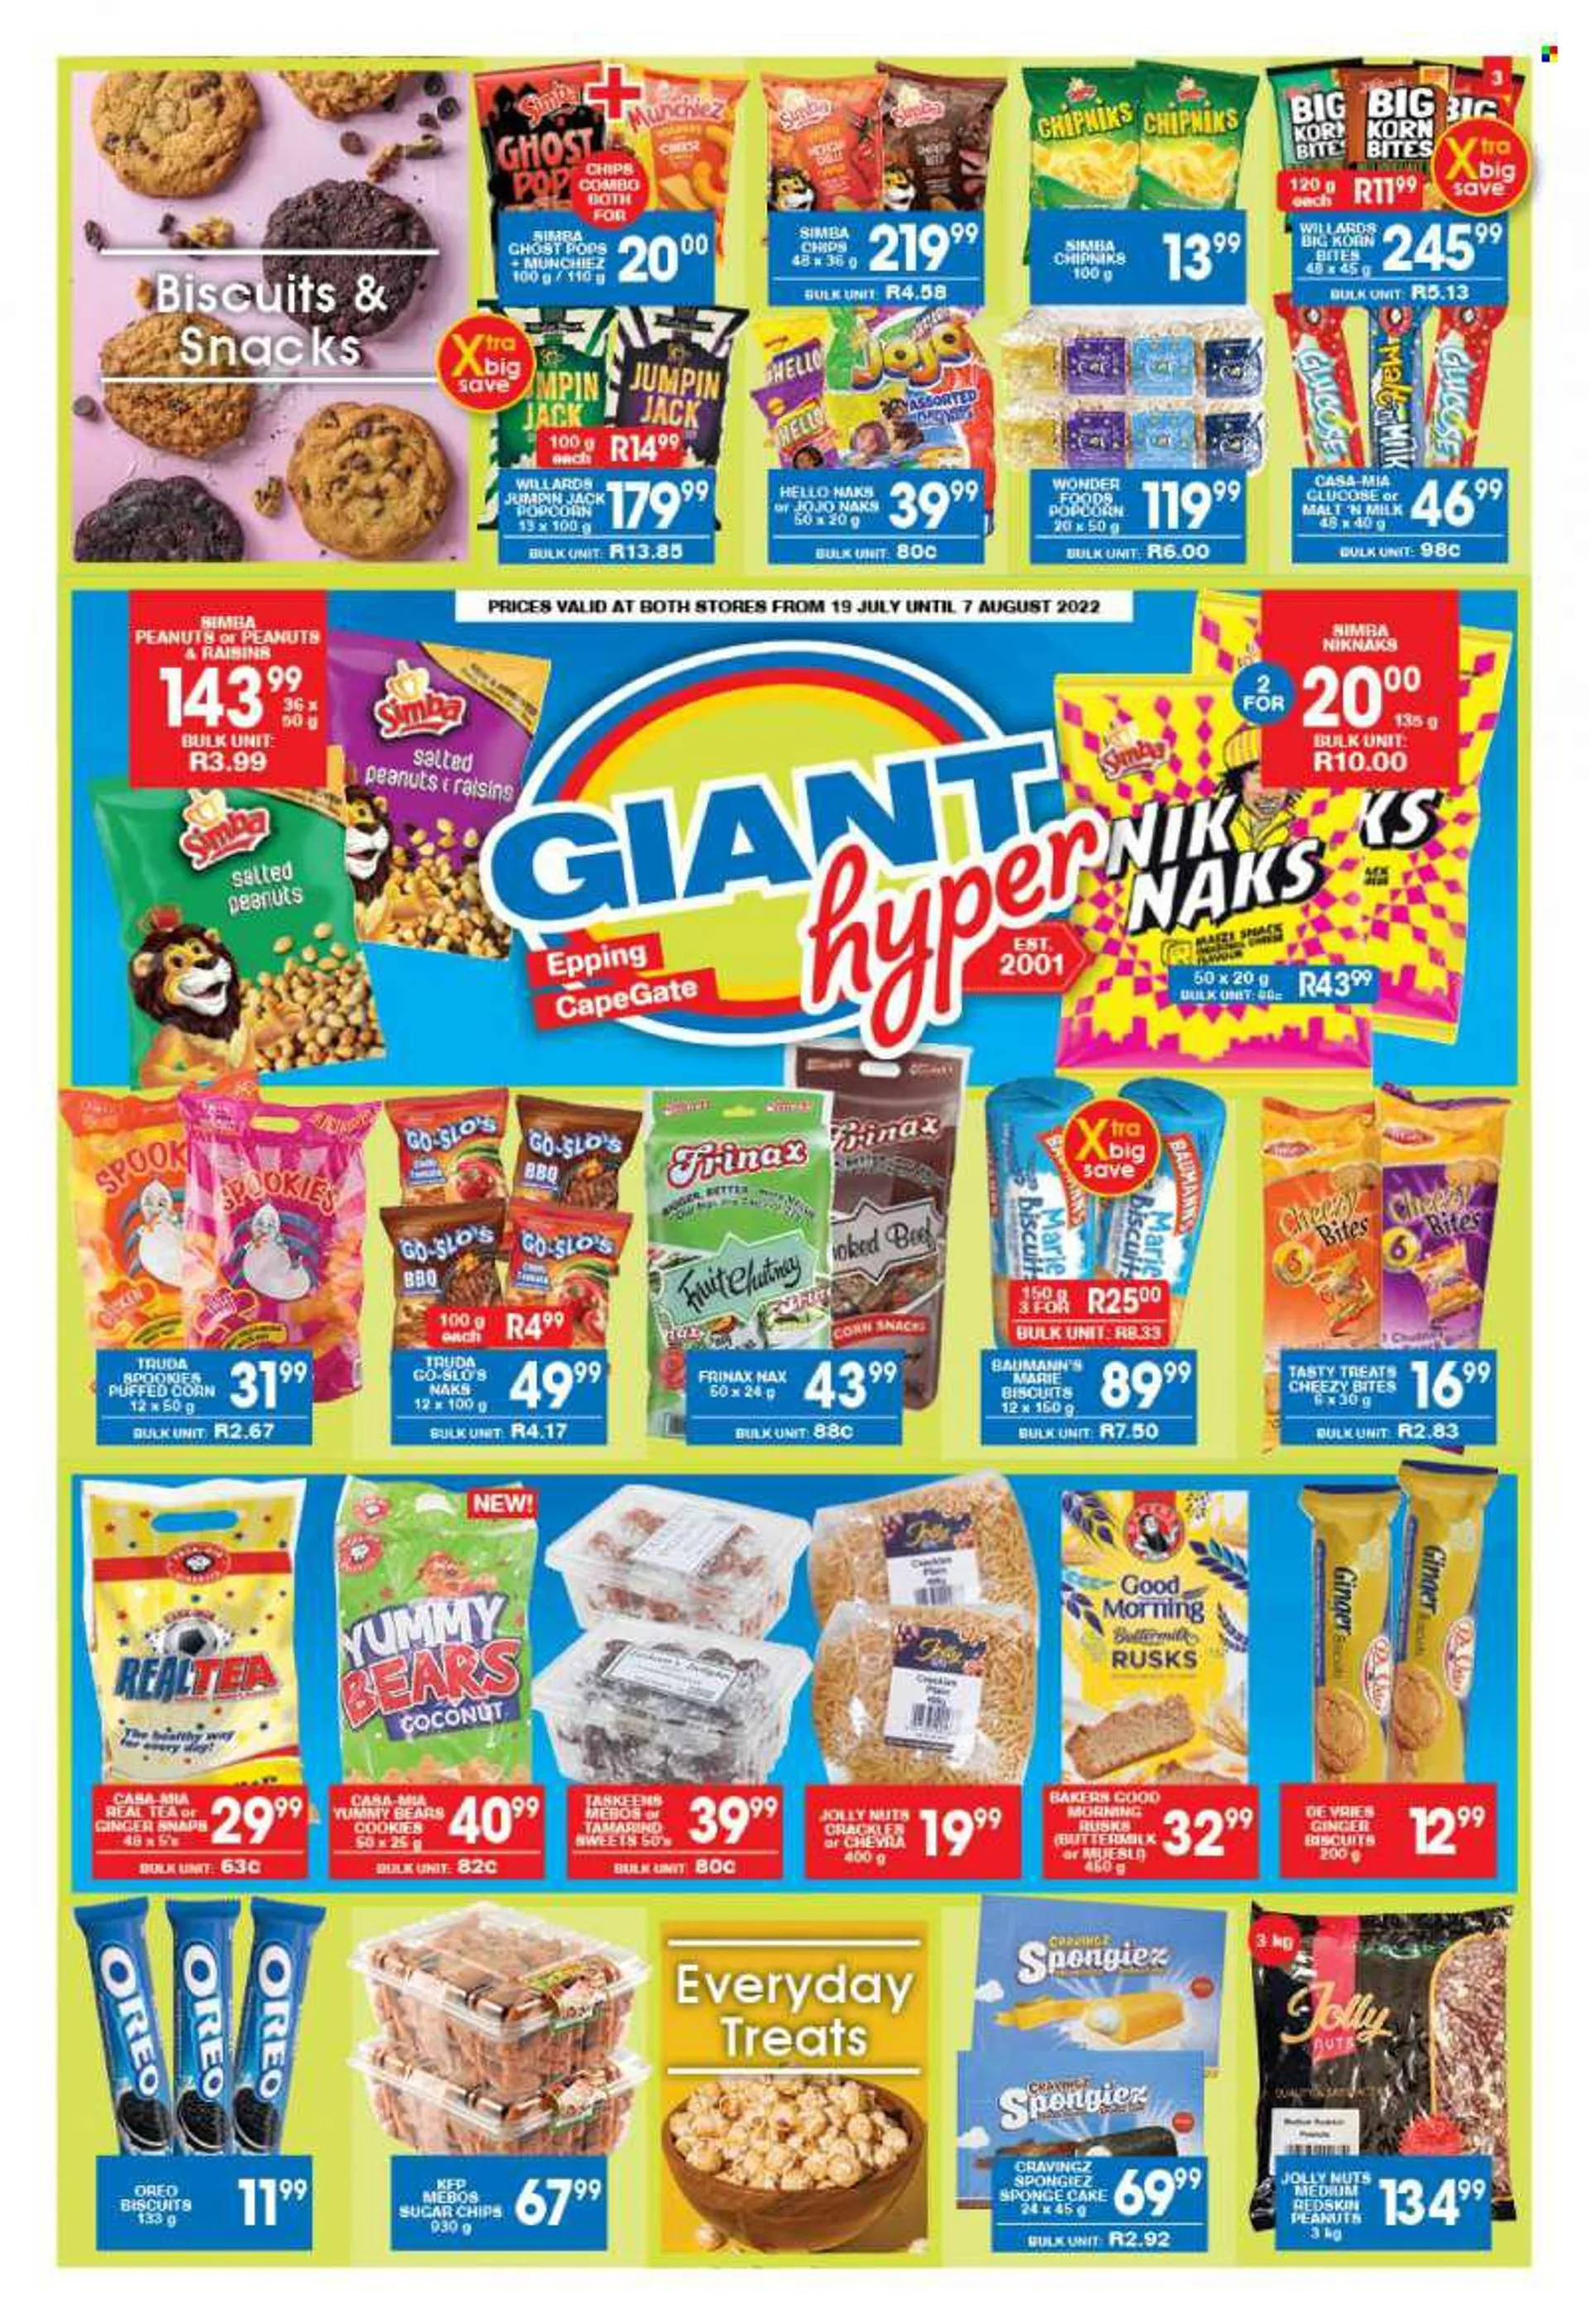 Giant Hyper catalogue  - 19/07/2022 - 07/08/2022 - Sales products - cake, sponge cake, rusks, coconut, cheese, Oreo, buttermilk, cookies, snack, biscuit, chips, maize snack, Simba, popcorn, sugar, tamarind, malt, muesli, chutney, peanuts, nuts, dried frui